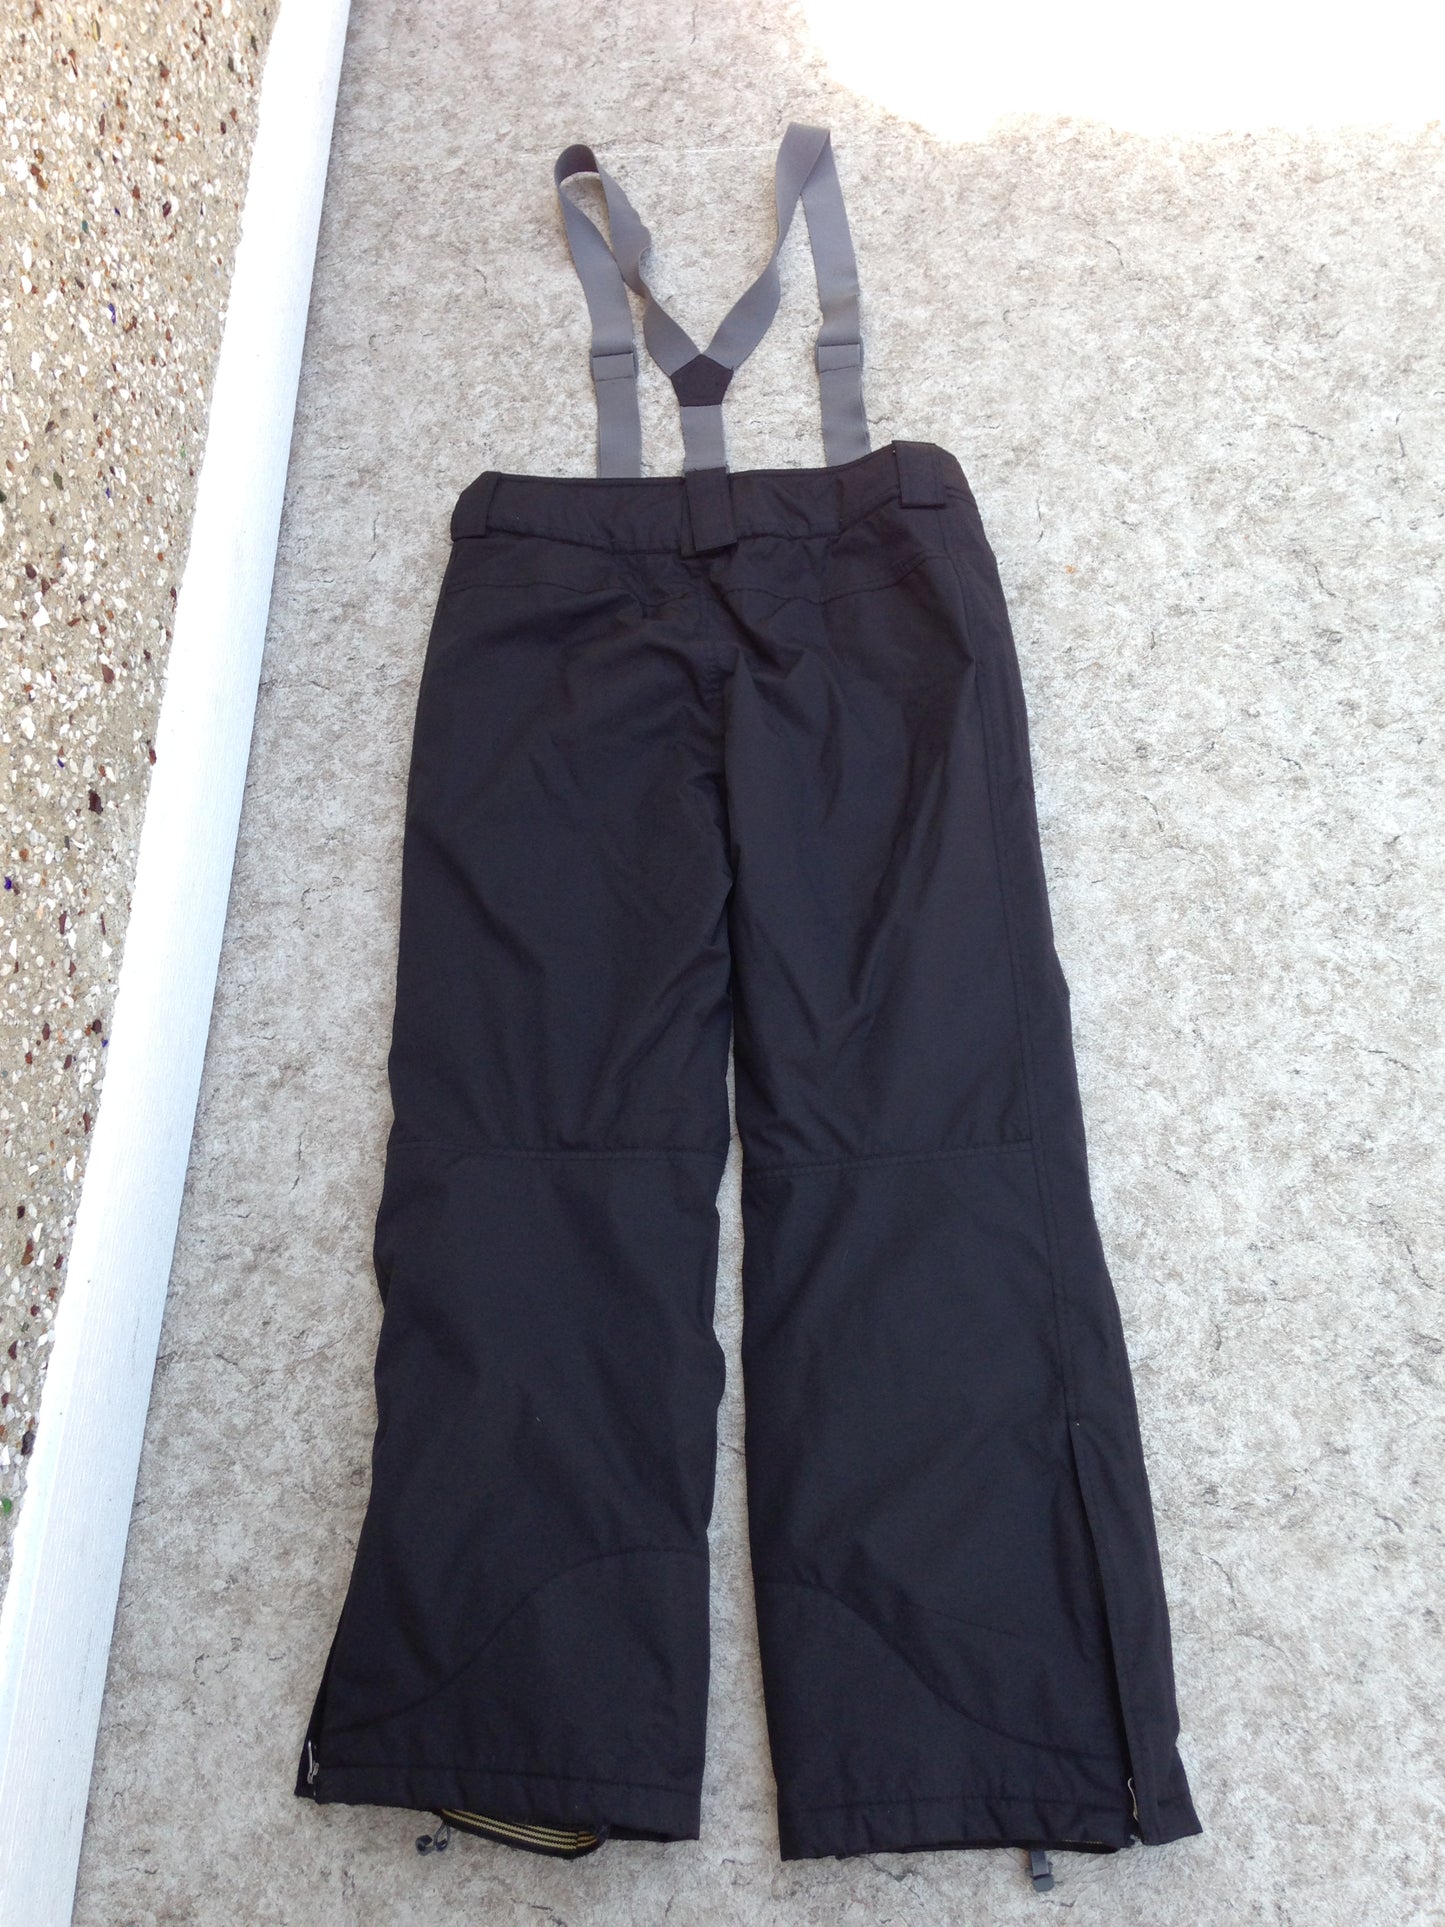 Snow Pants Men's Size Large Gravity Black With Suspenders New Demo Model